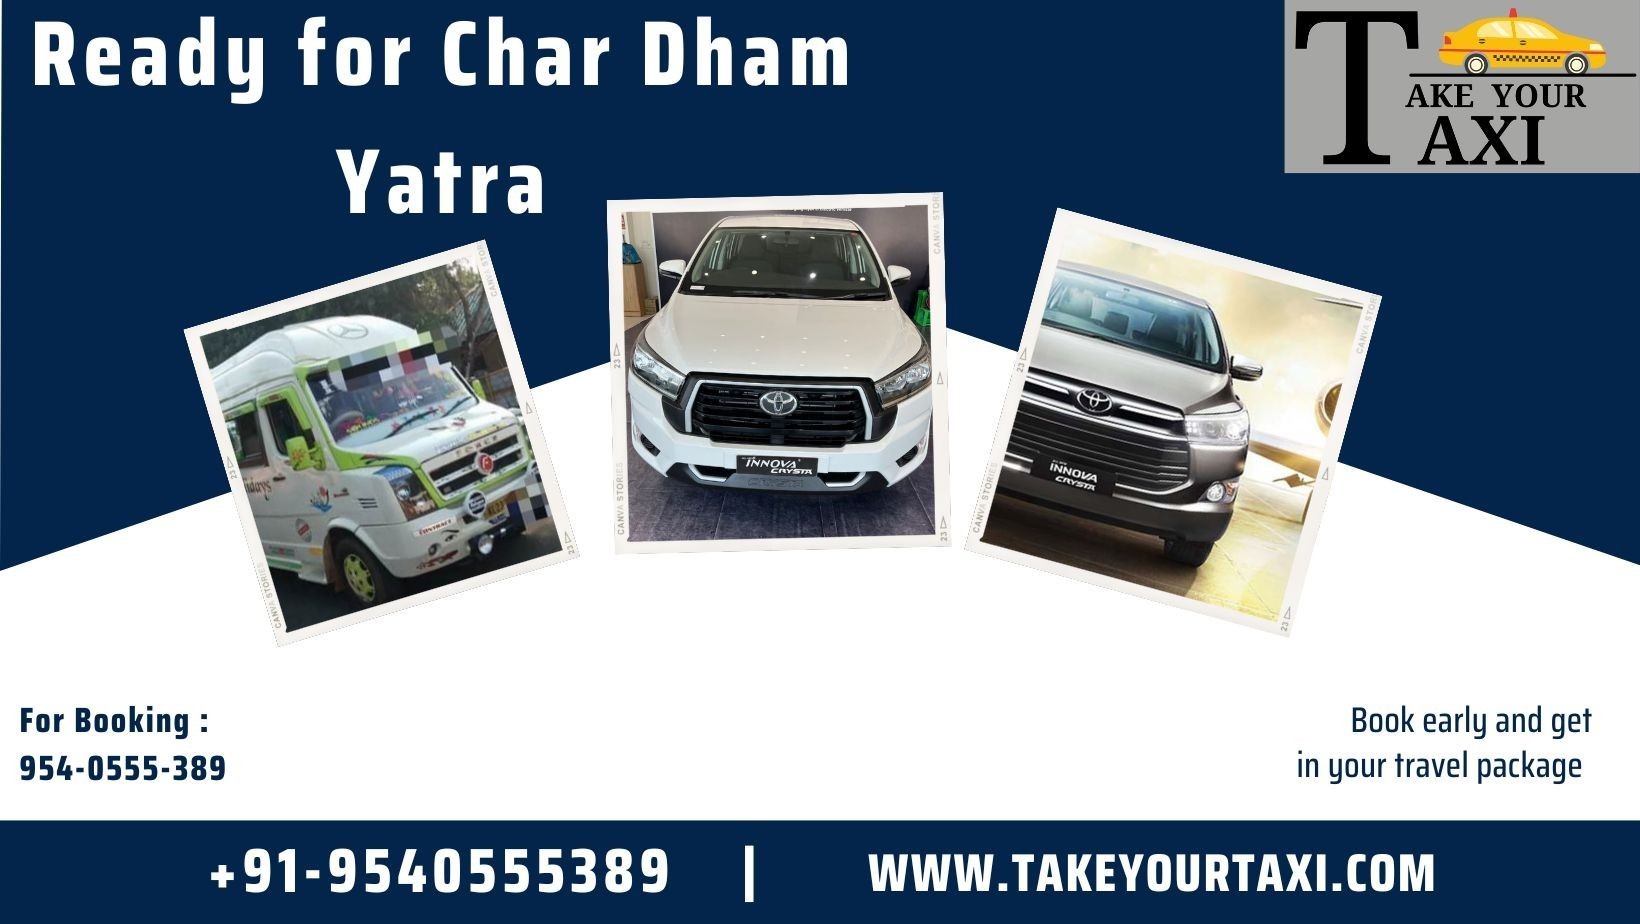 best taxi service in Gurgaon 